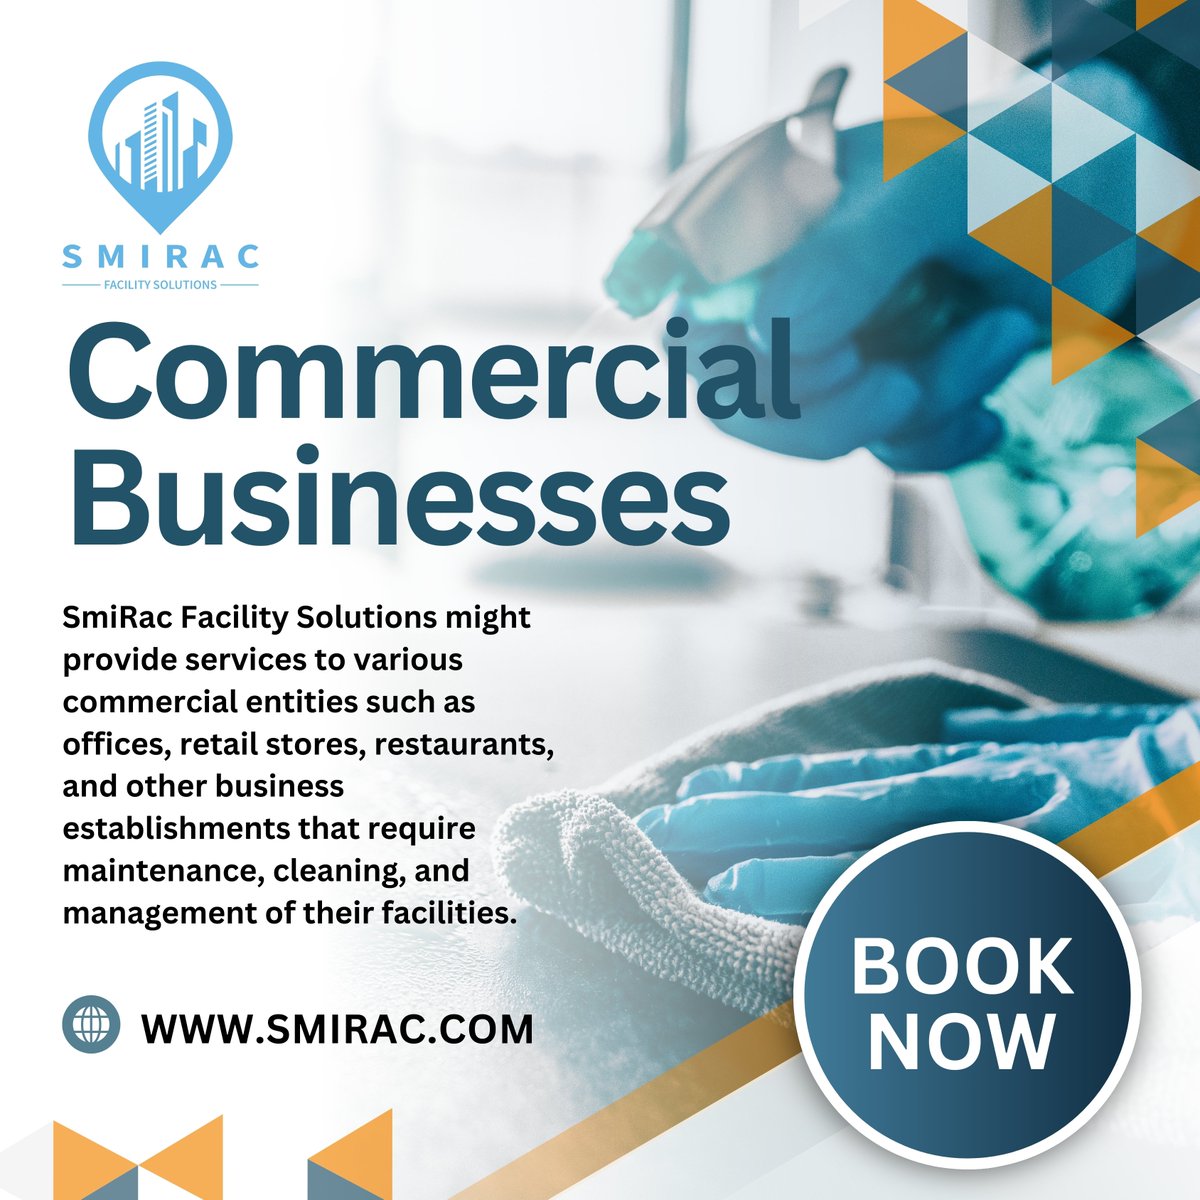 🌟 Excited to Elevate Your Business Space? 🌟

#SmiRacExcellence #CommercialInnovation #FacilityManagement #BusinessGrowth #EcoFriendly #SmartSolutions #cleaning #cleaninghacks #cleaningtips